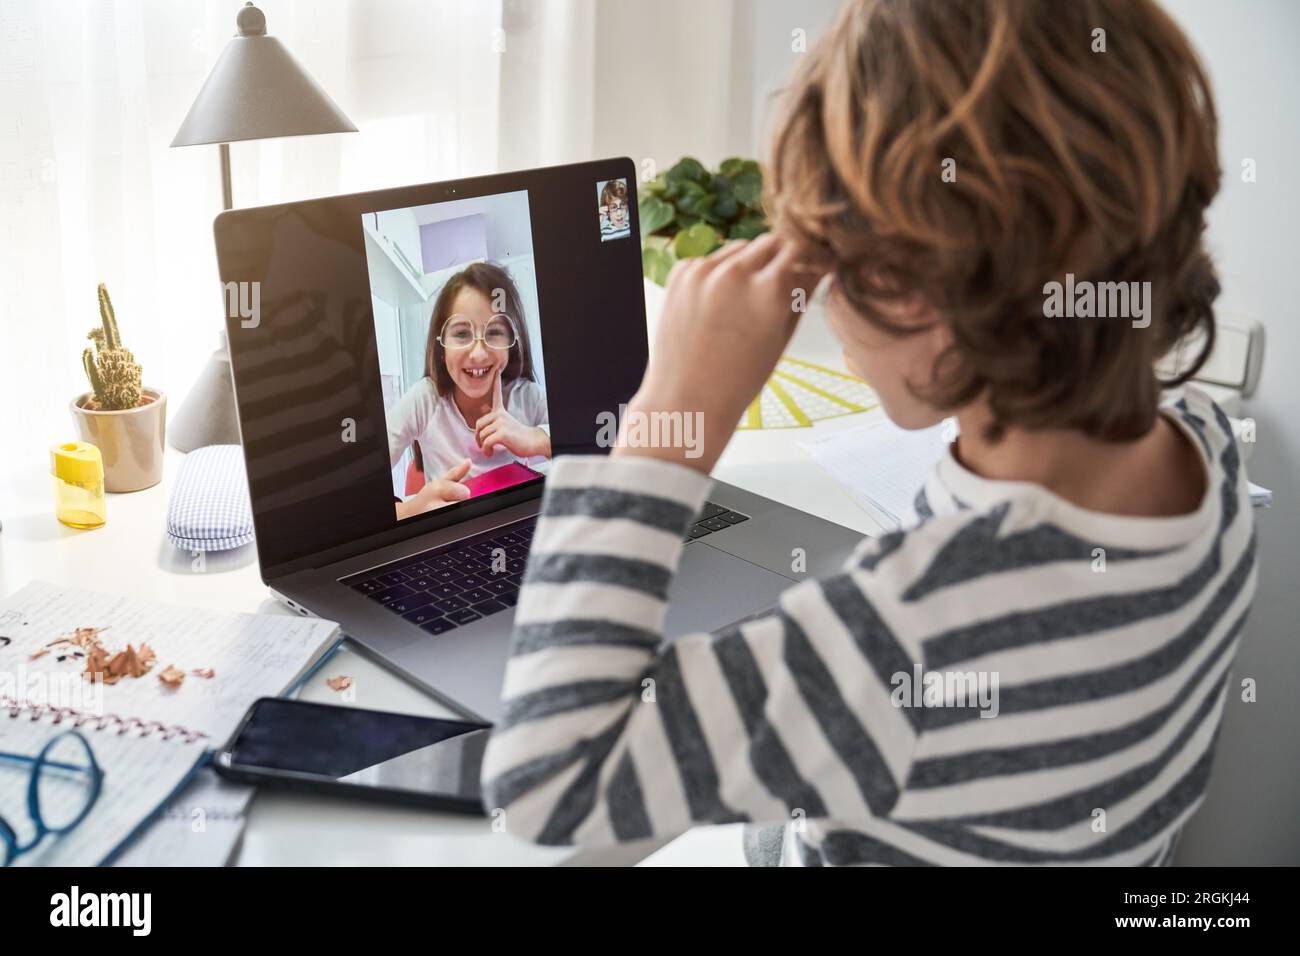 Side view of kid video chatting on laptop with girl in eyeglasses while sitting at table with smartphone in room Stock Photo